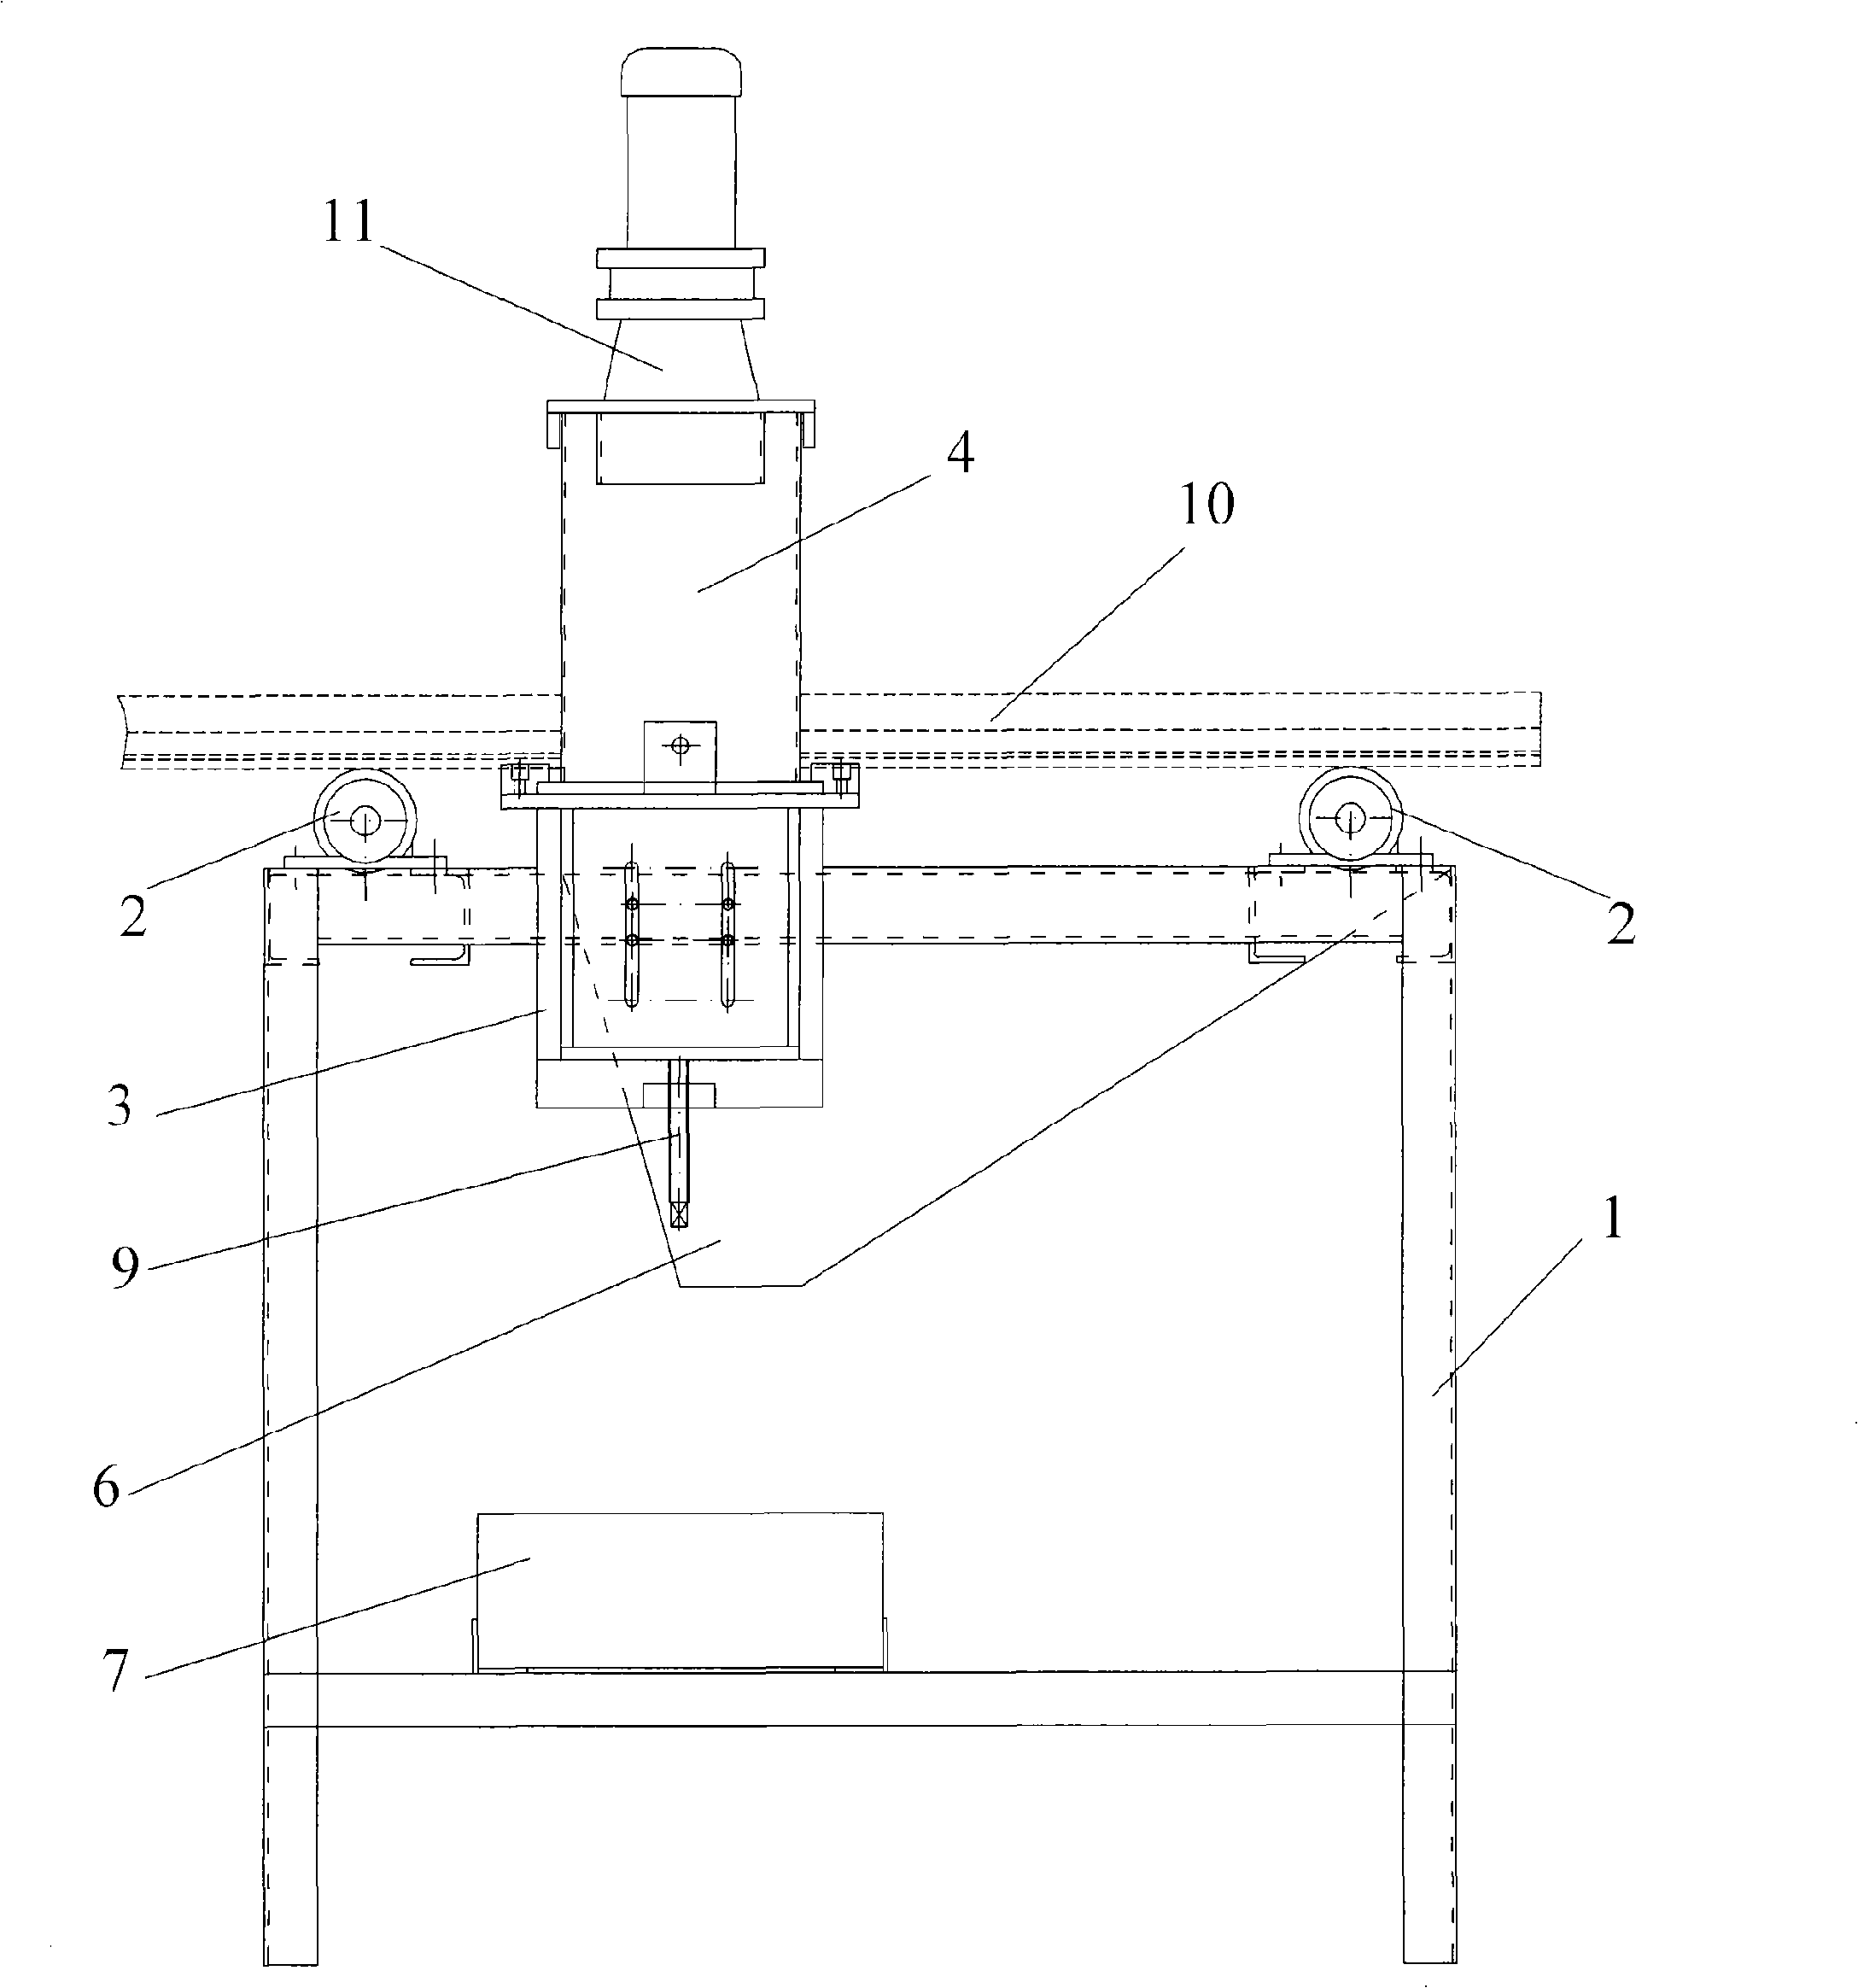 Anticorrosive oil automatic painting apparatus for adjustable rails